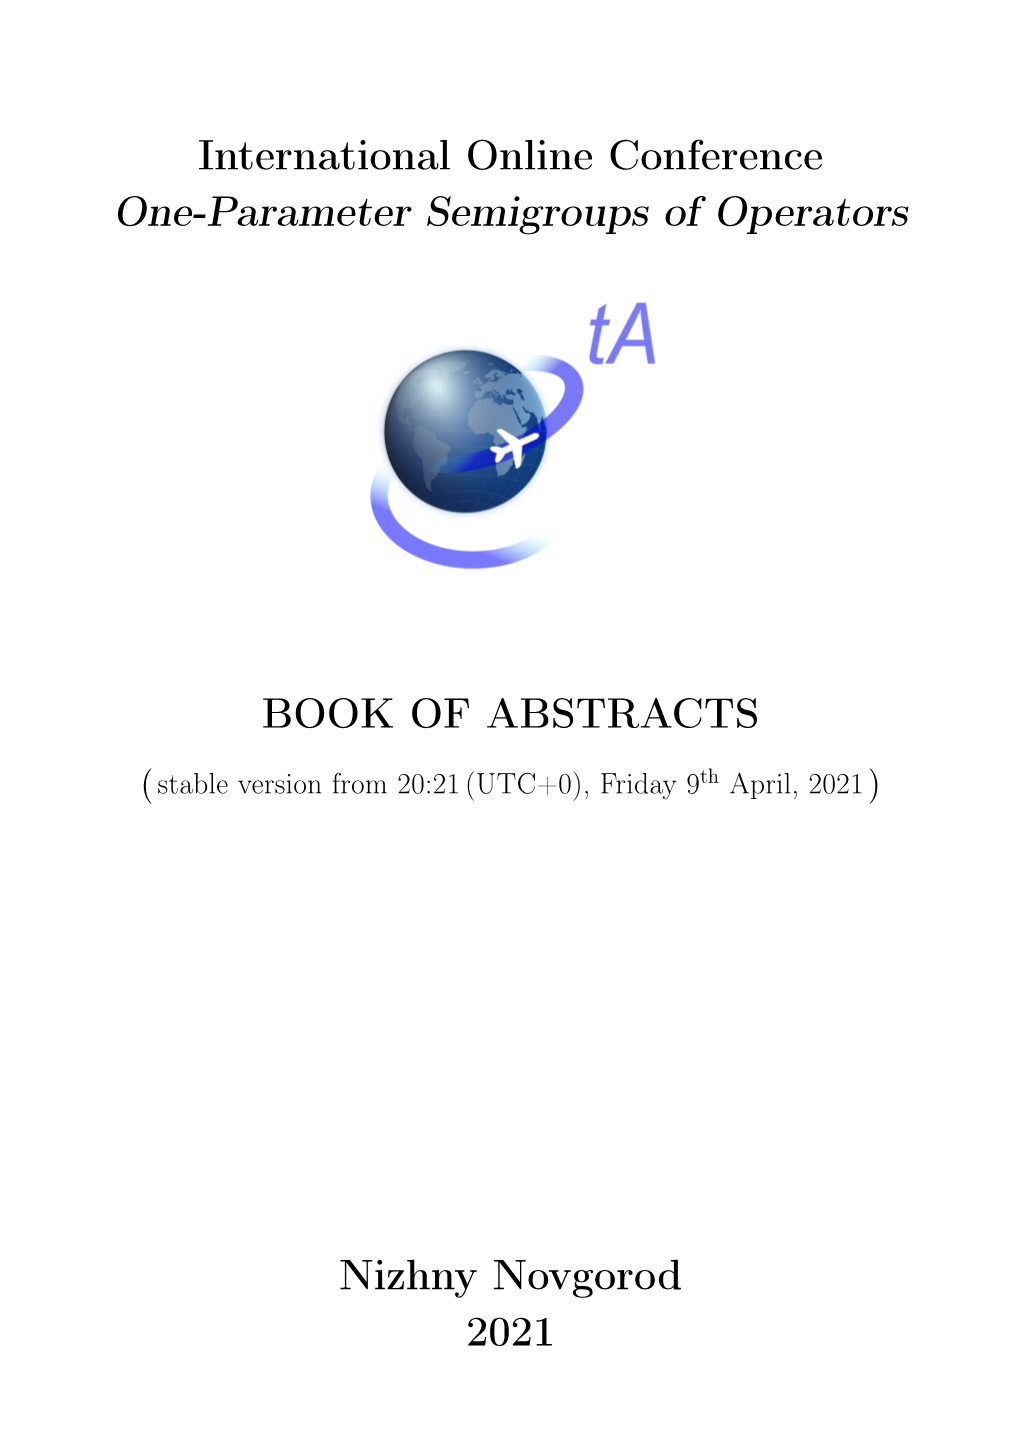 International Online Conference One-Parameter Semigroups of Operators